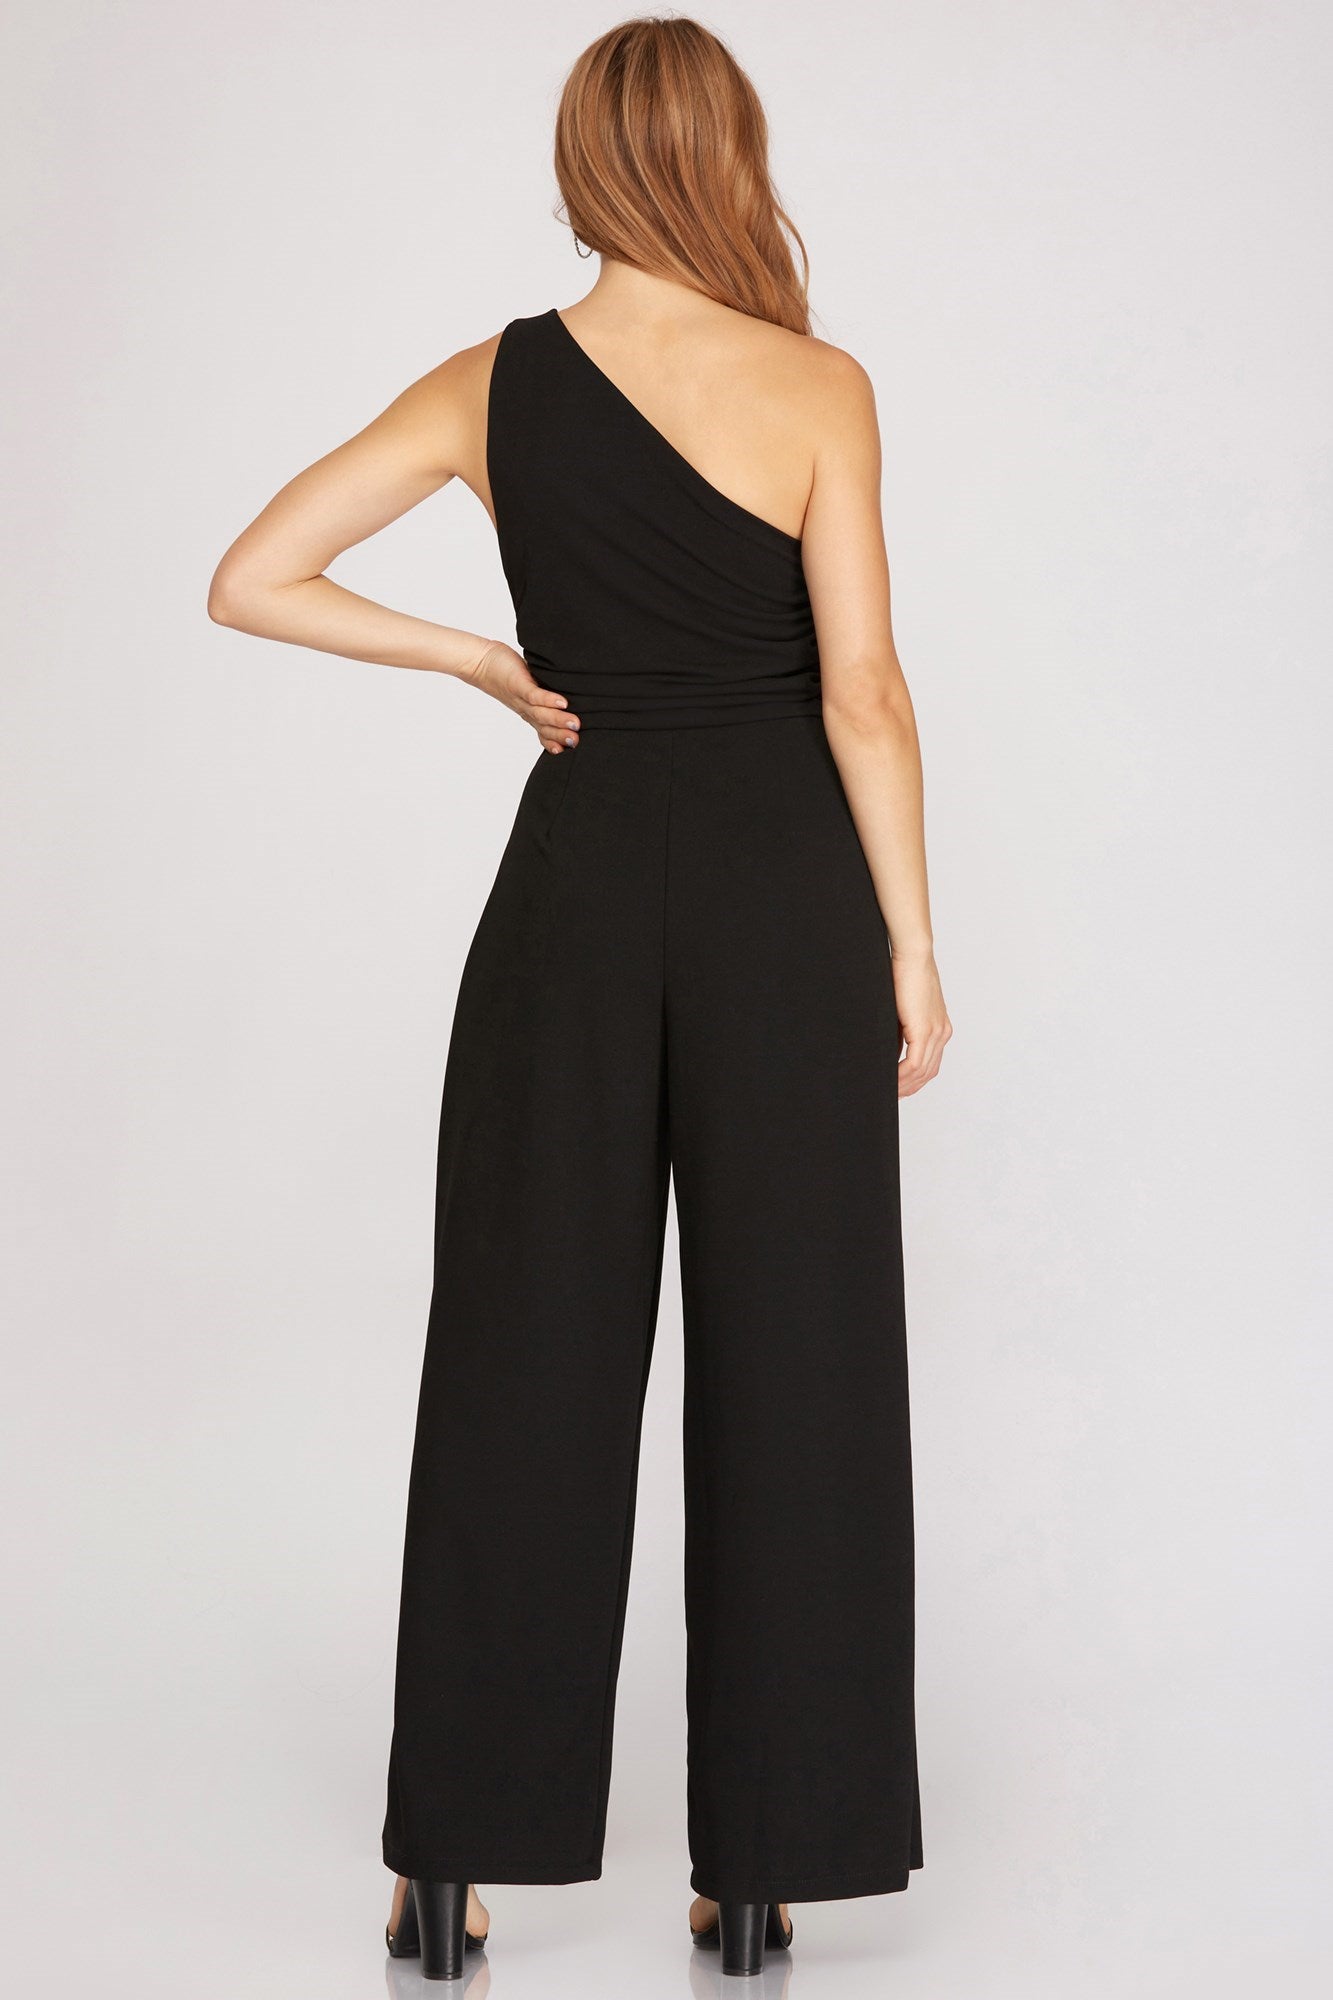 SHE AND SKY Women's Jumpsuit Sleeveless One Shoulder Heavy Knit Pleated Jumpsuit || David's Clothing